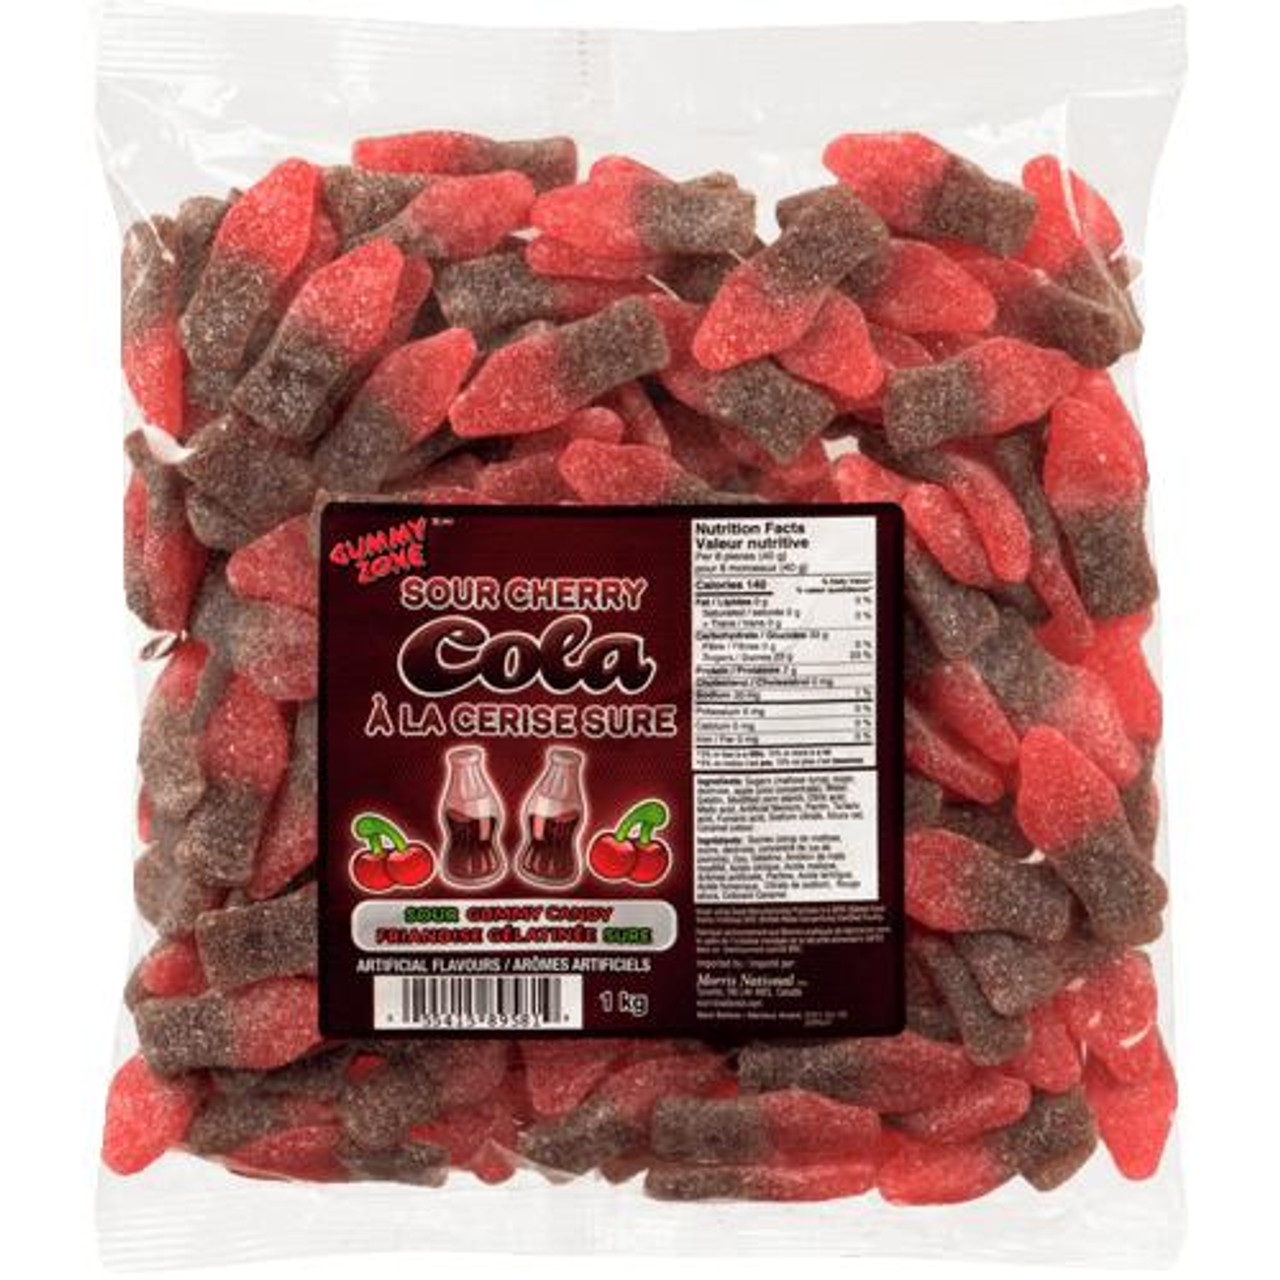  GUMMY ZONE Sour Cherry Cola Bottles 1kg/2.2lbs - Tangy and Fizzy Candy Delights 